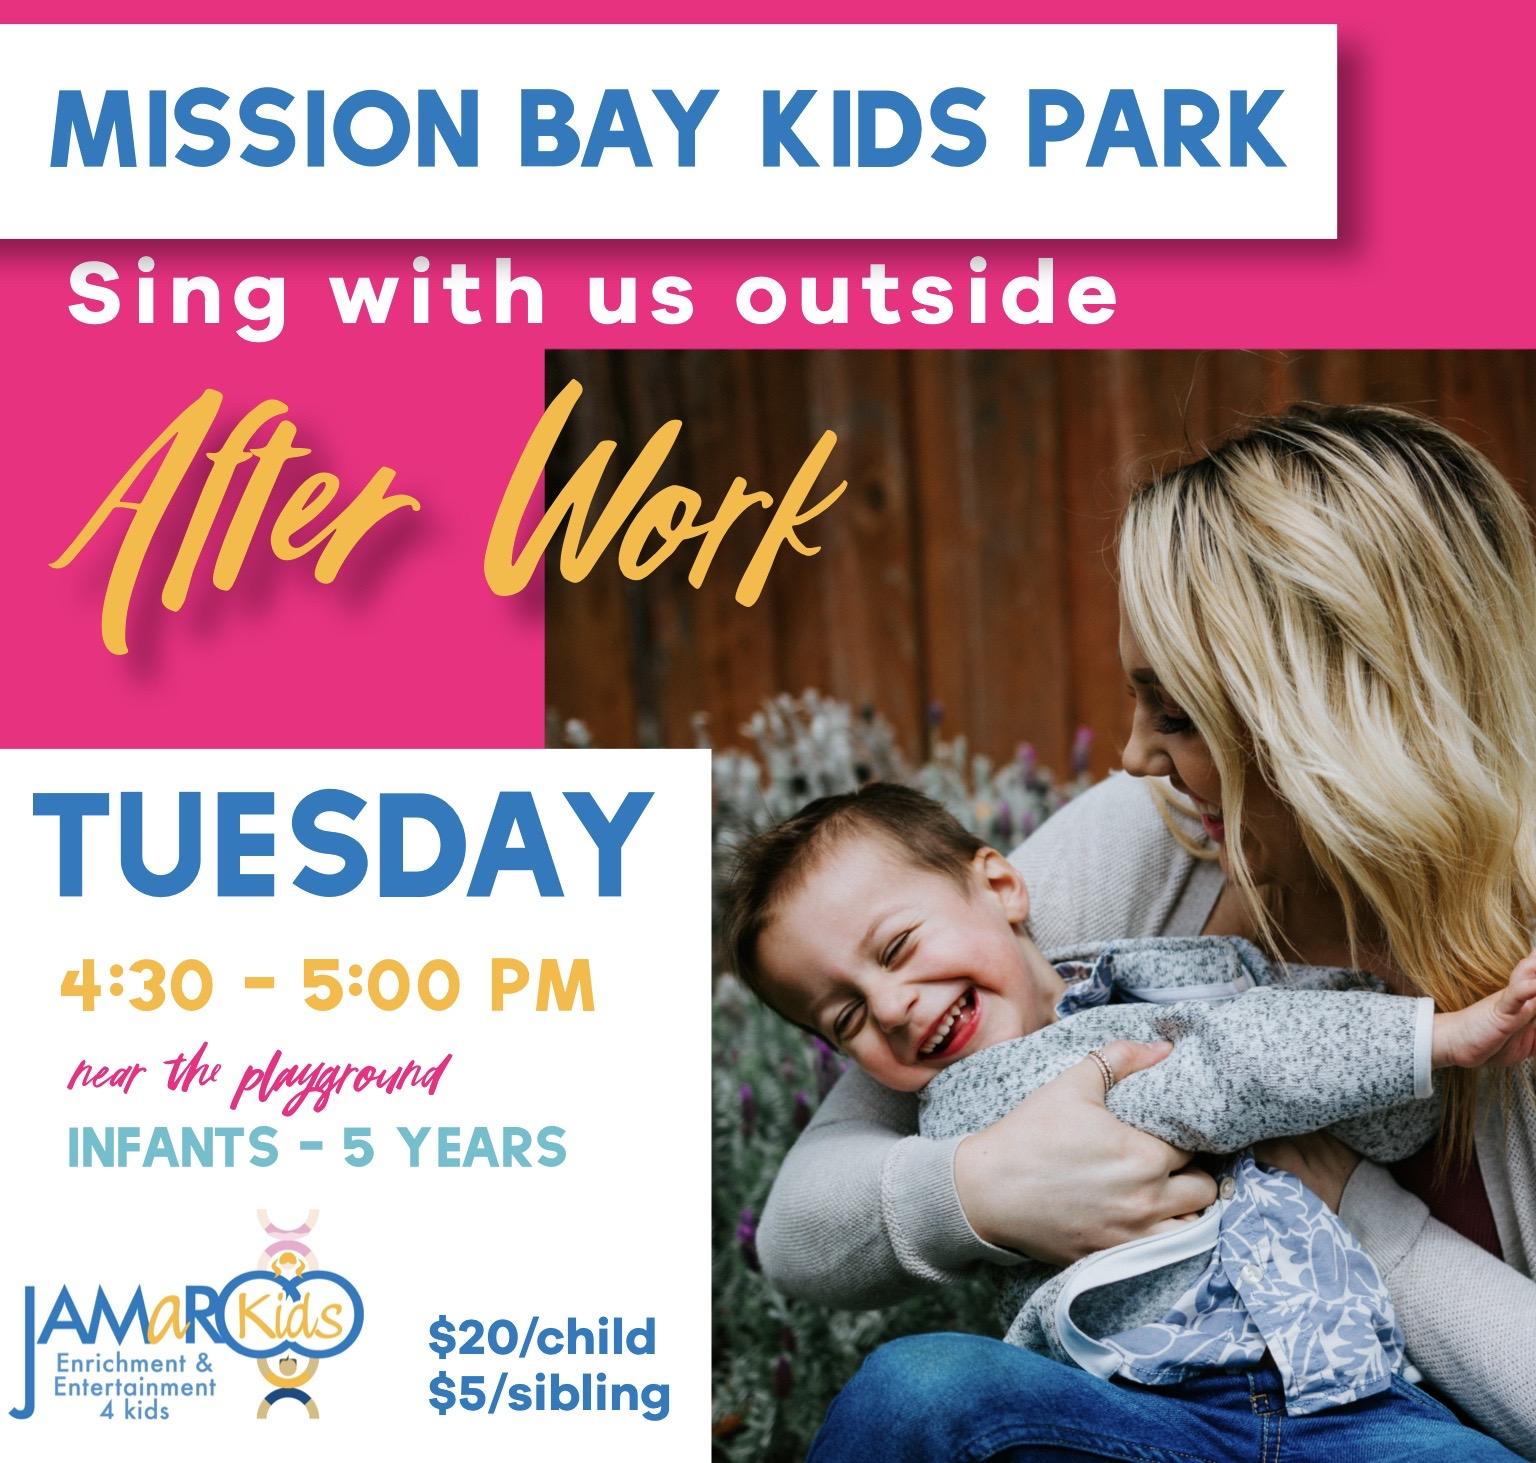 Music in the Park: Mission Bay Kids Park